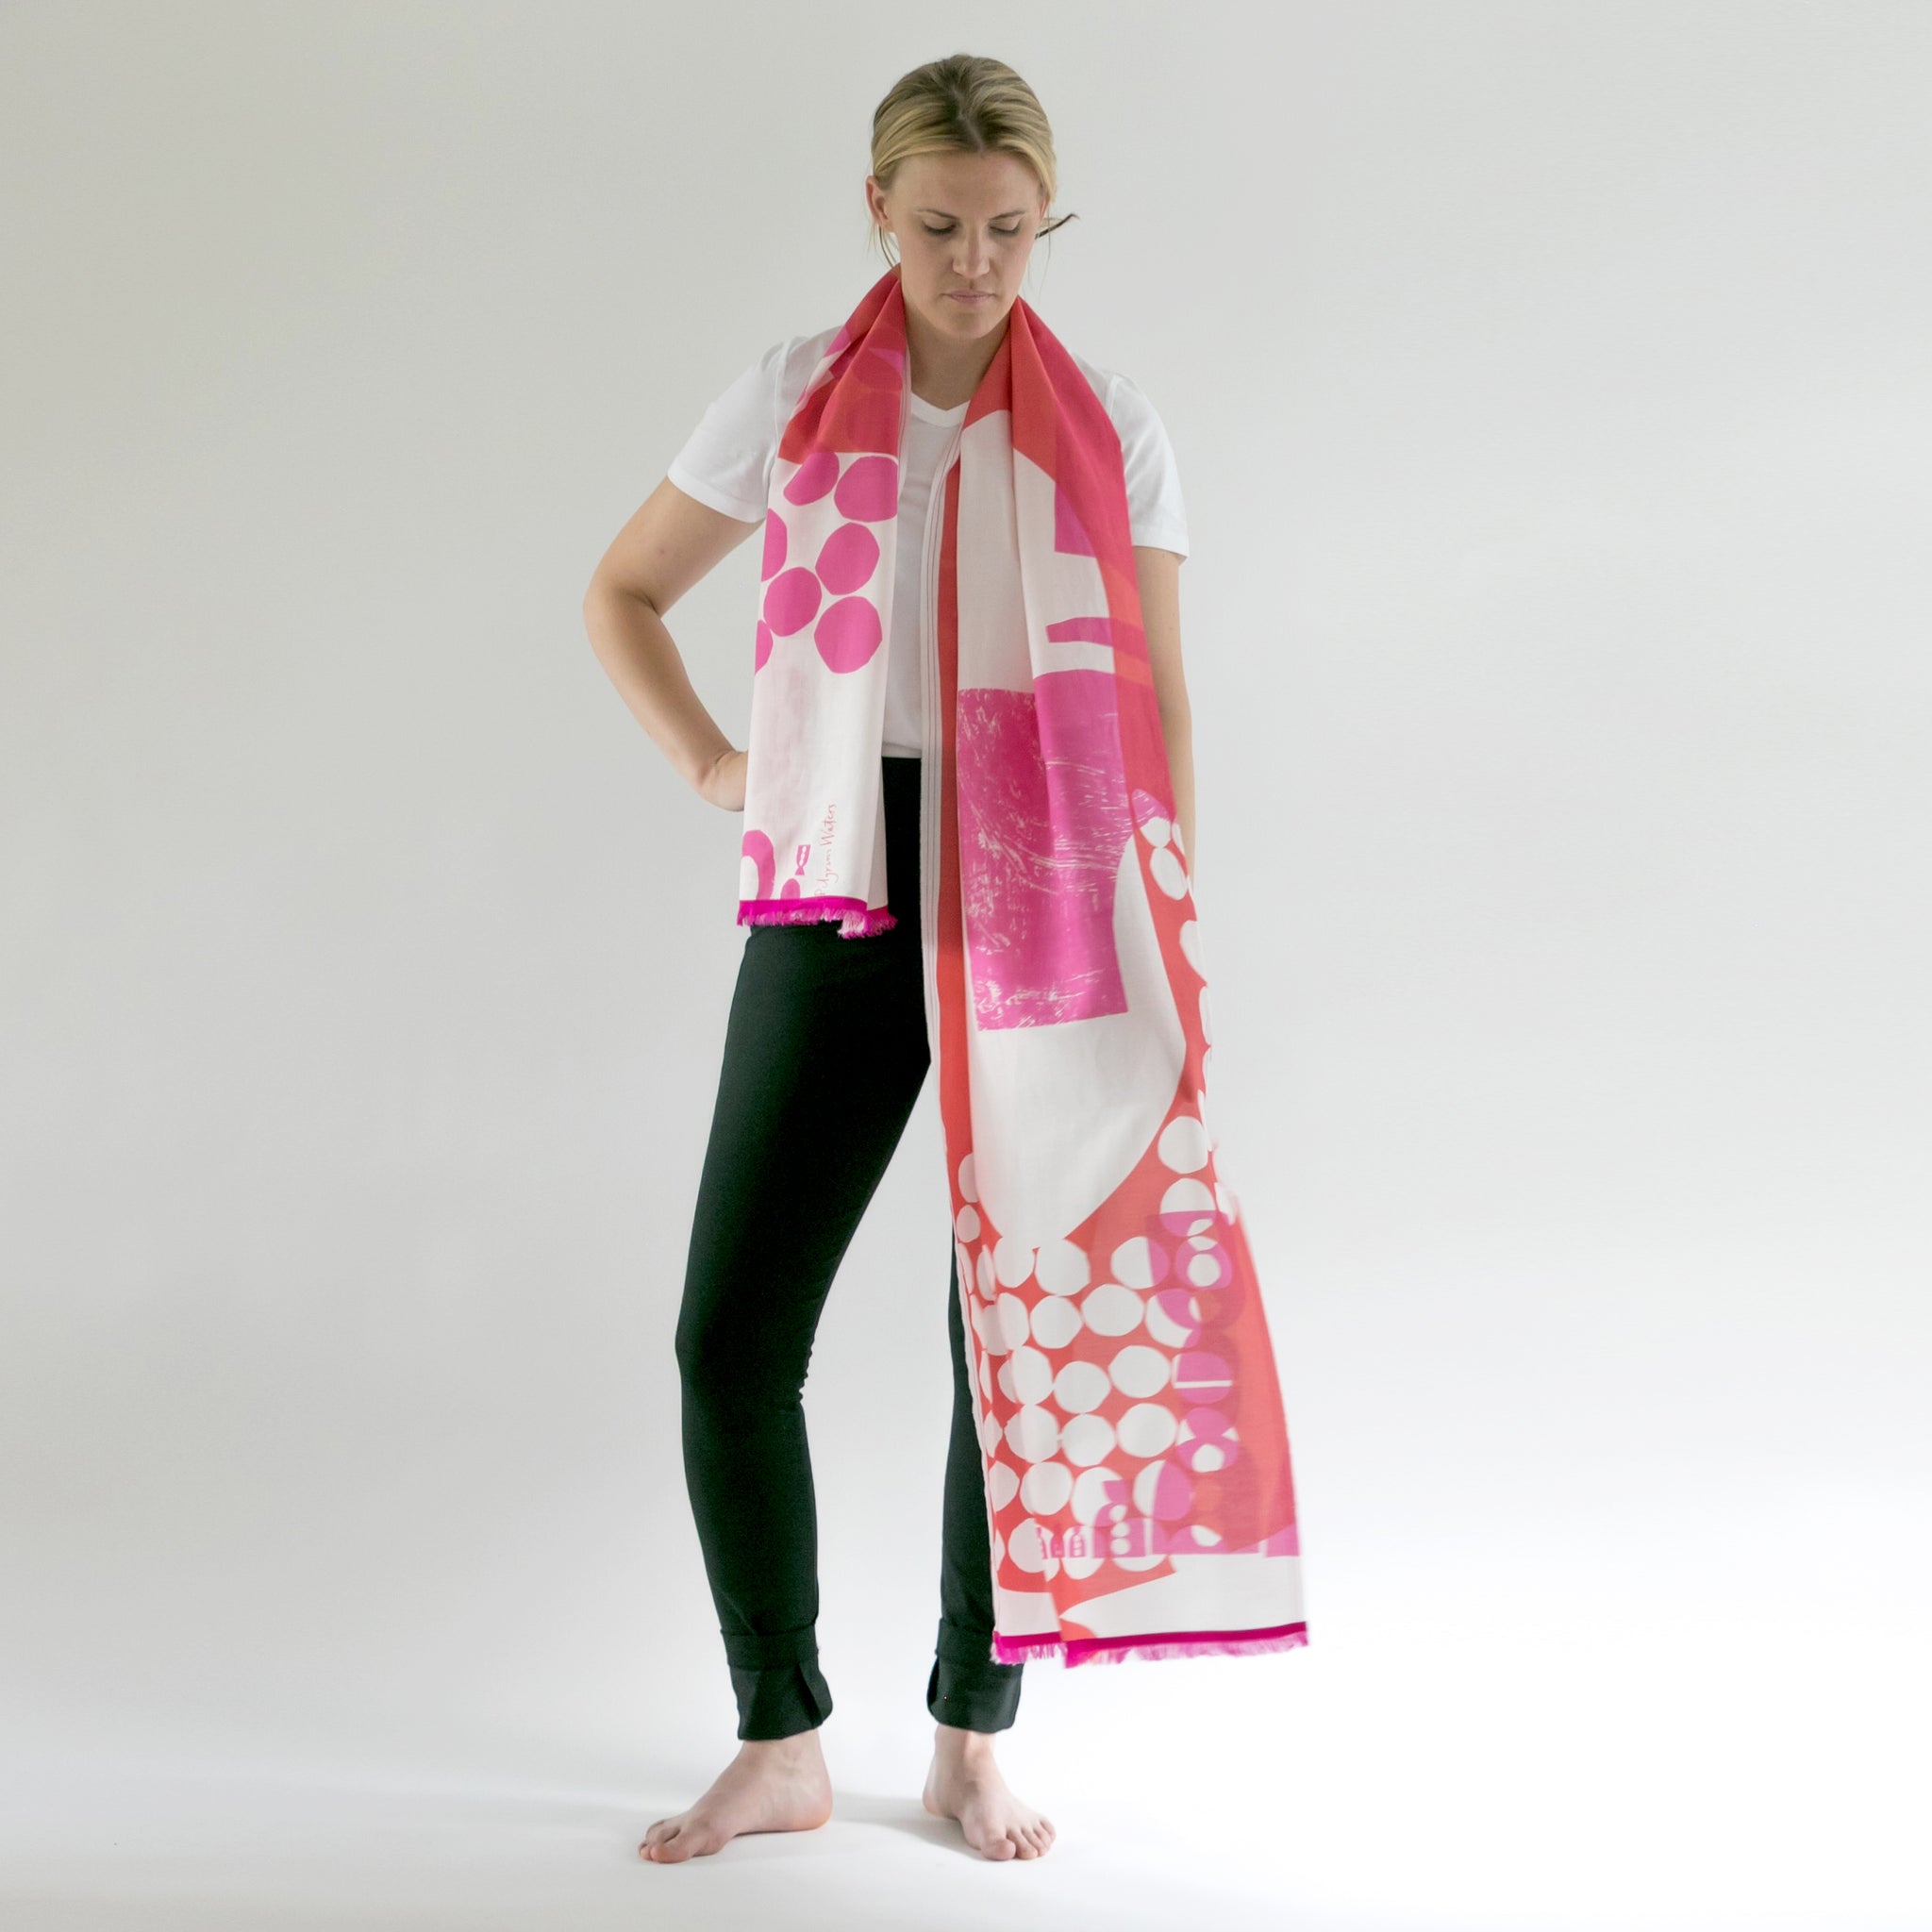 Discover the versatility of our Monogram Scarf Series, available